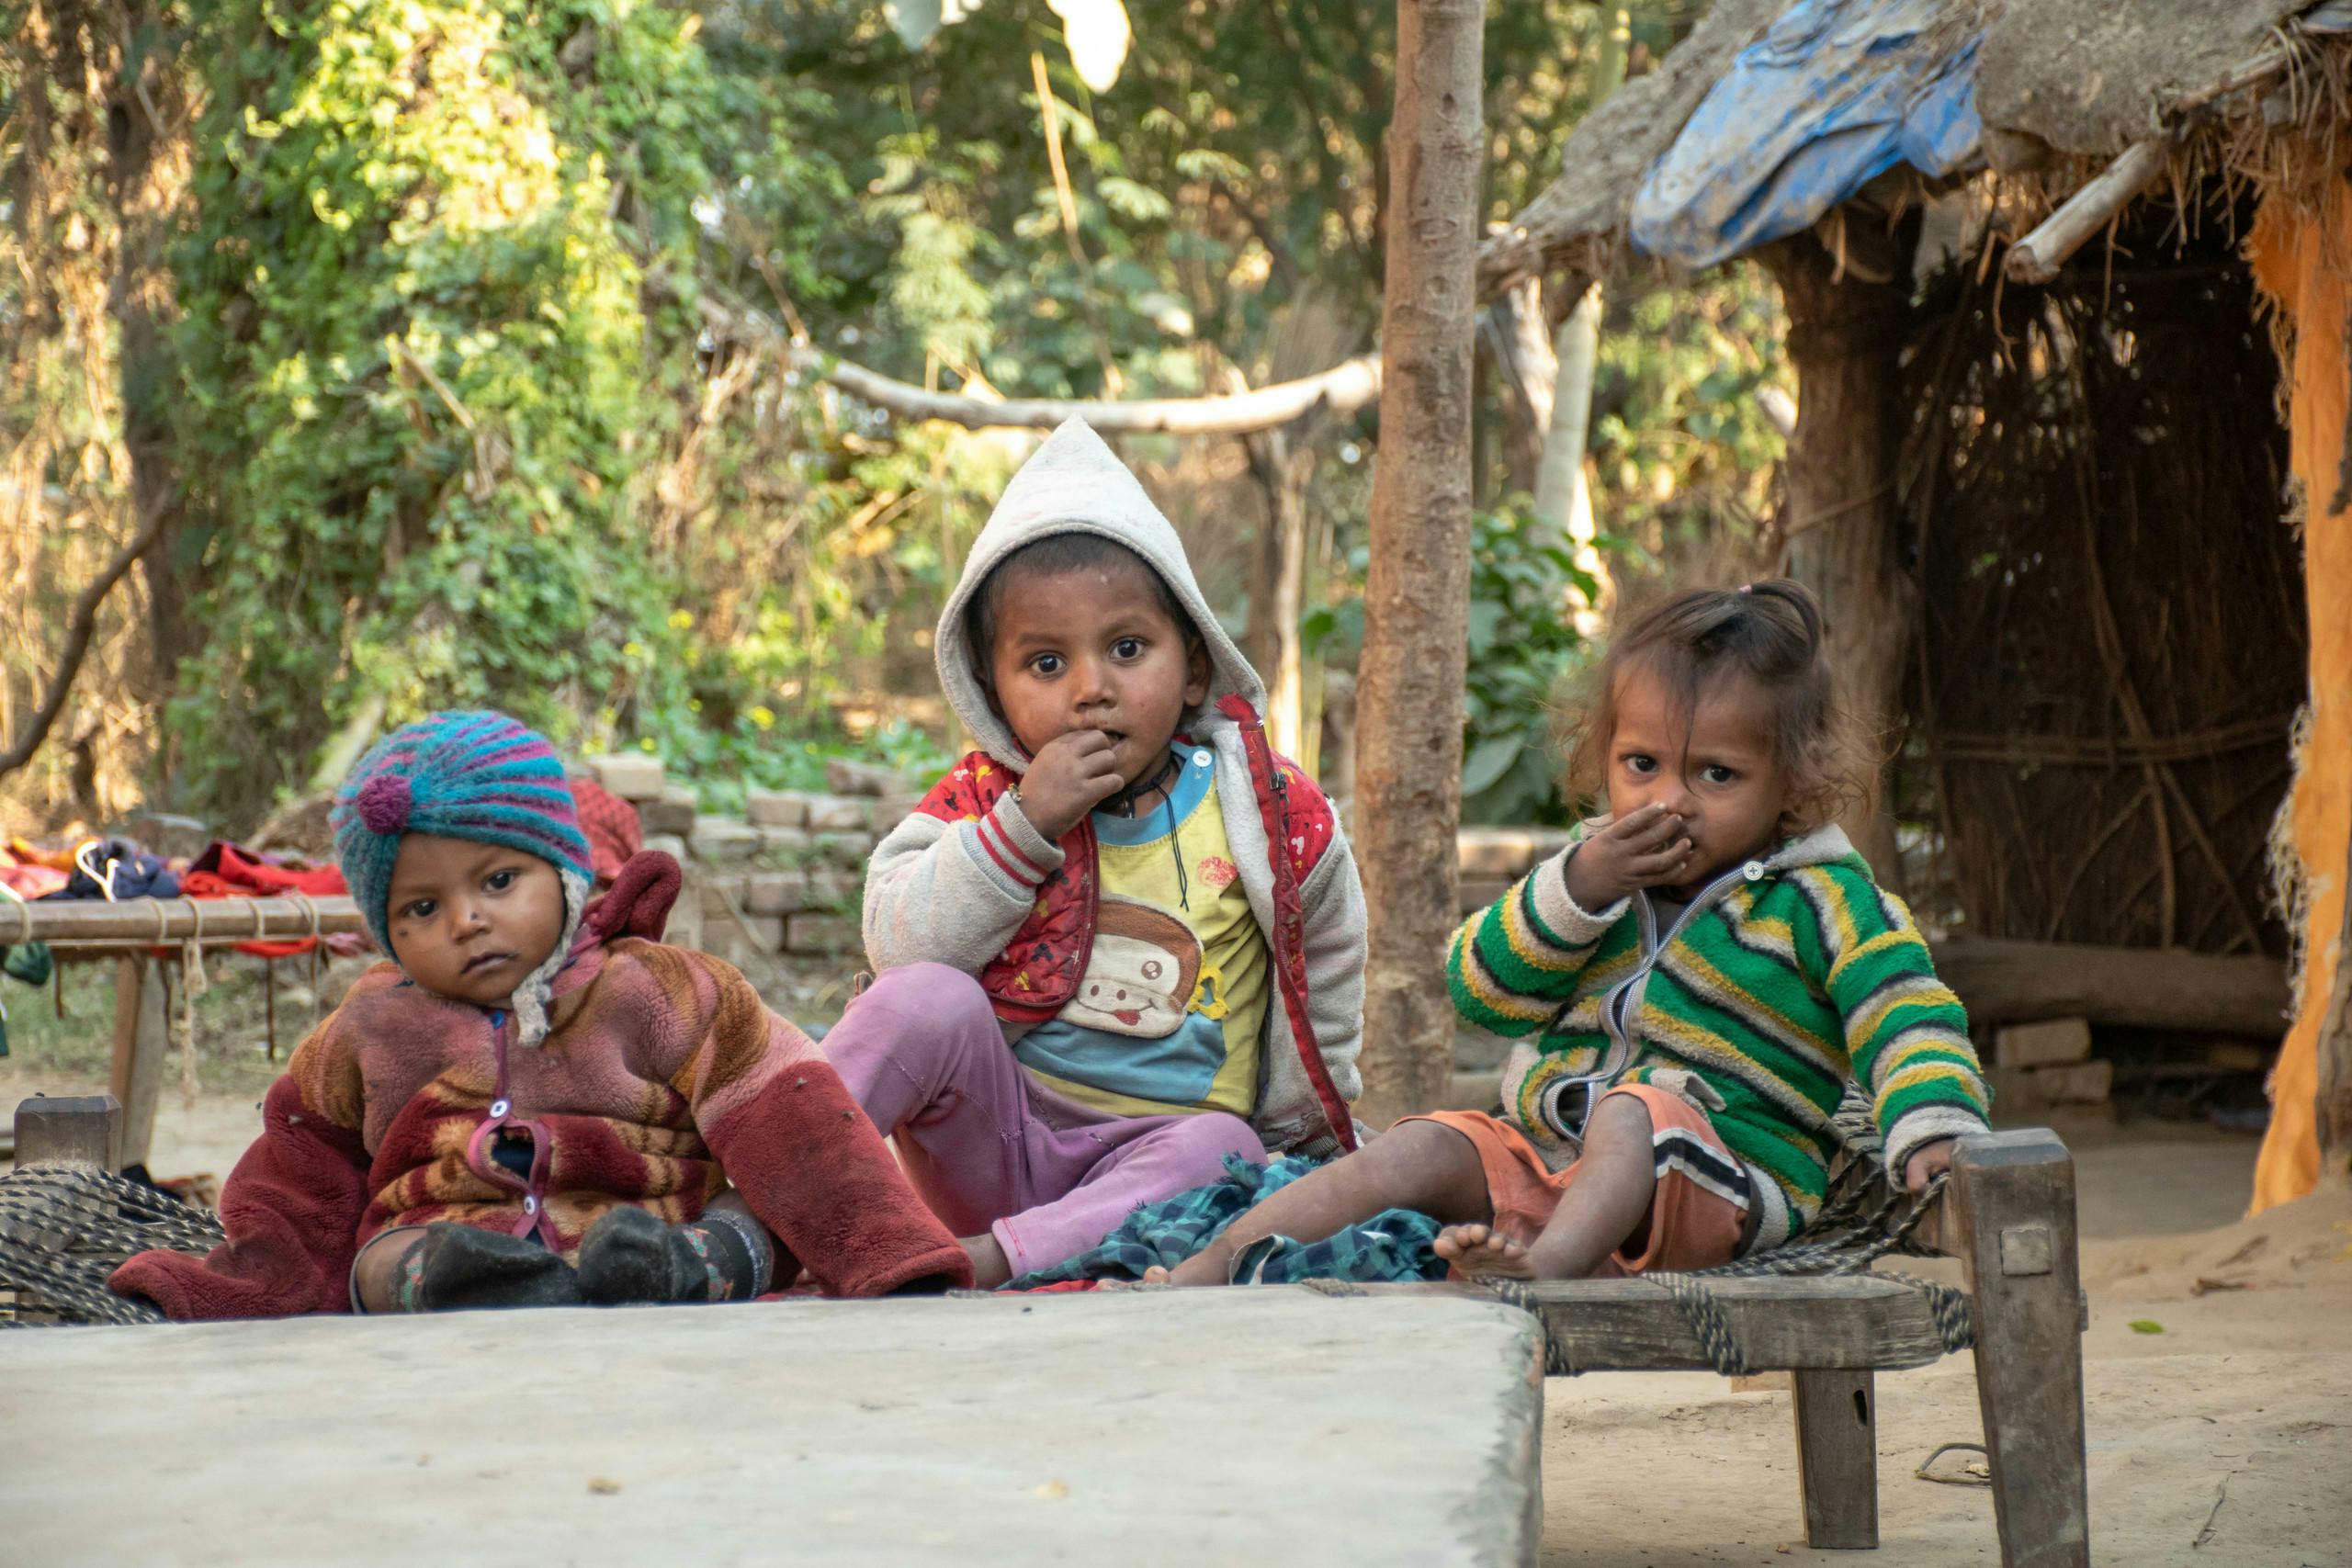 Three small children from Nepal look into the camera. They are dressed in winter clothes. In the background you can see part of a rudimentary hut and the forest of the project area, which is far away.